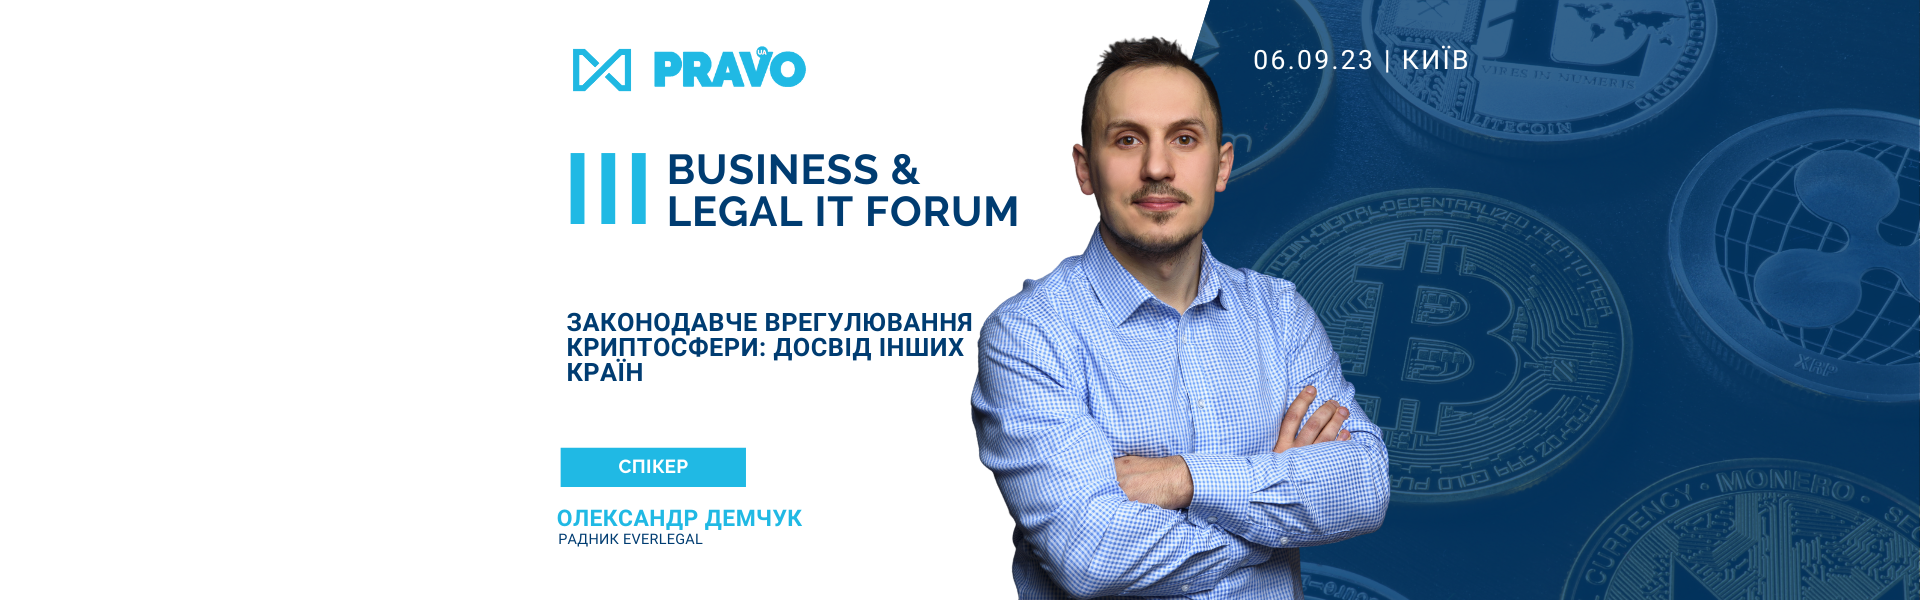 Welcome to the III Business&Legal IT Forum